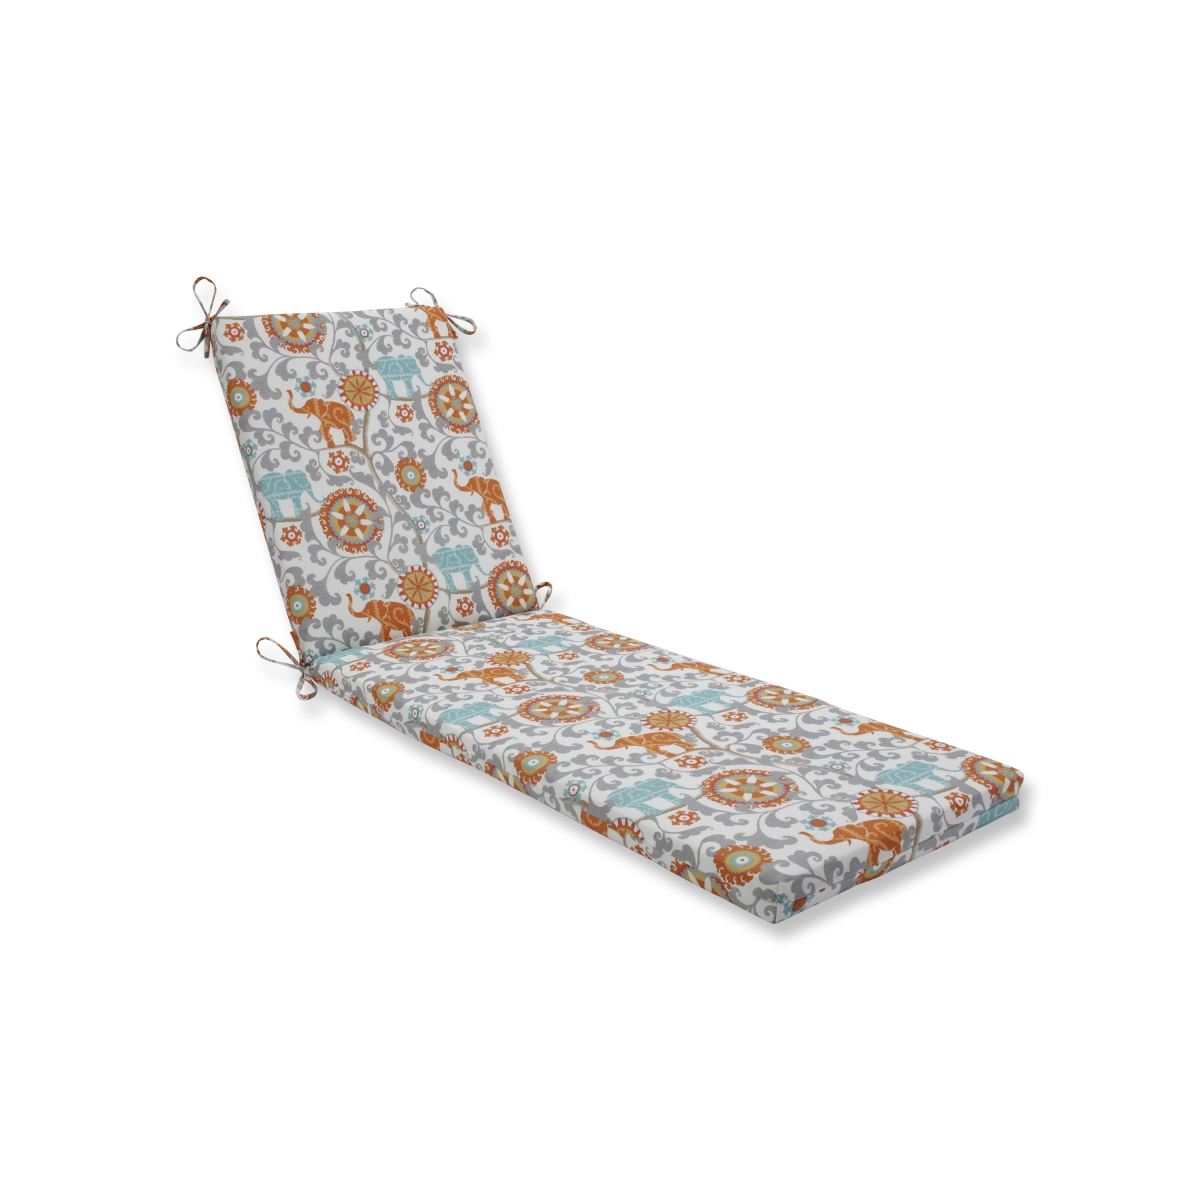 80 X 23 X 3 In. Outdoor & Indoor Menagerie Cayenne Chaise Lounge Cushion, Grey